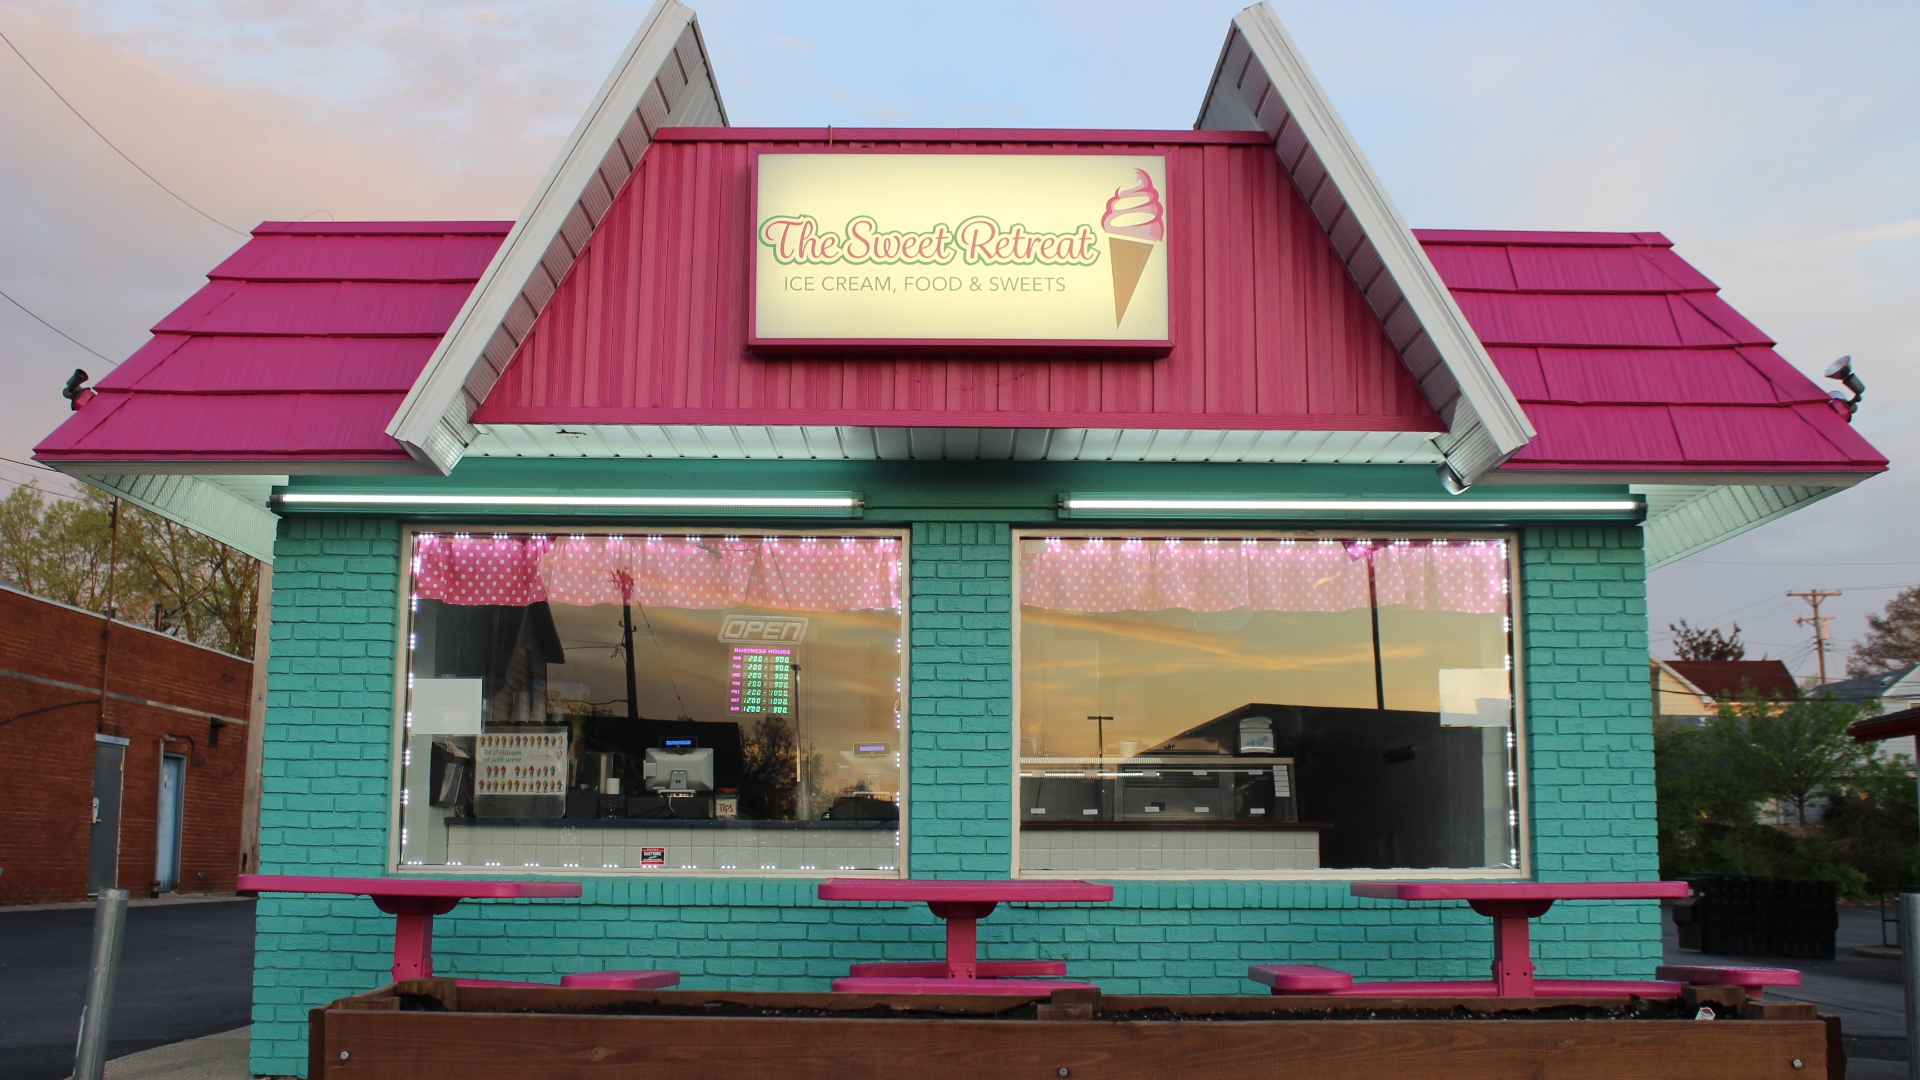 Sweet Retreat opened in 2018 in the former space of Dairy Queen on Smithville Road in the Belmont neighborhood of Dayton.